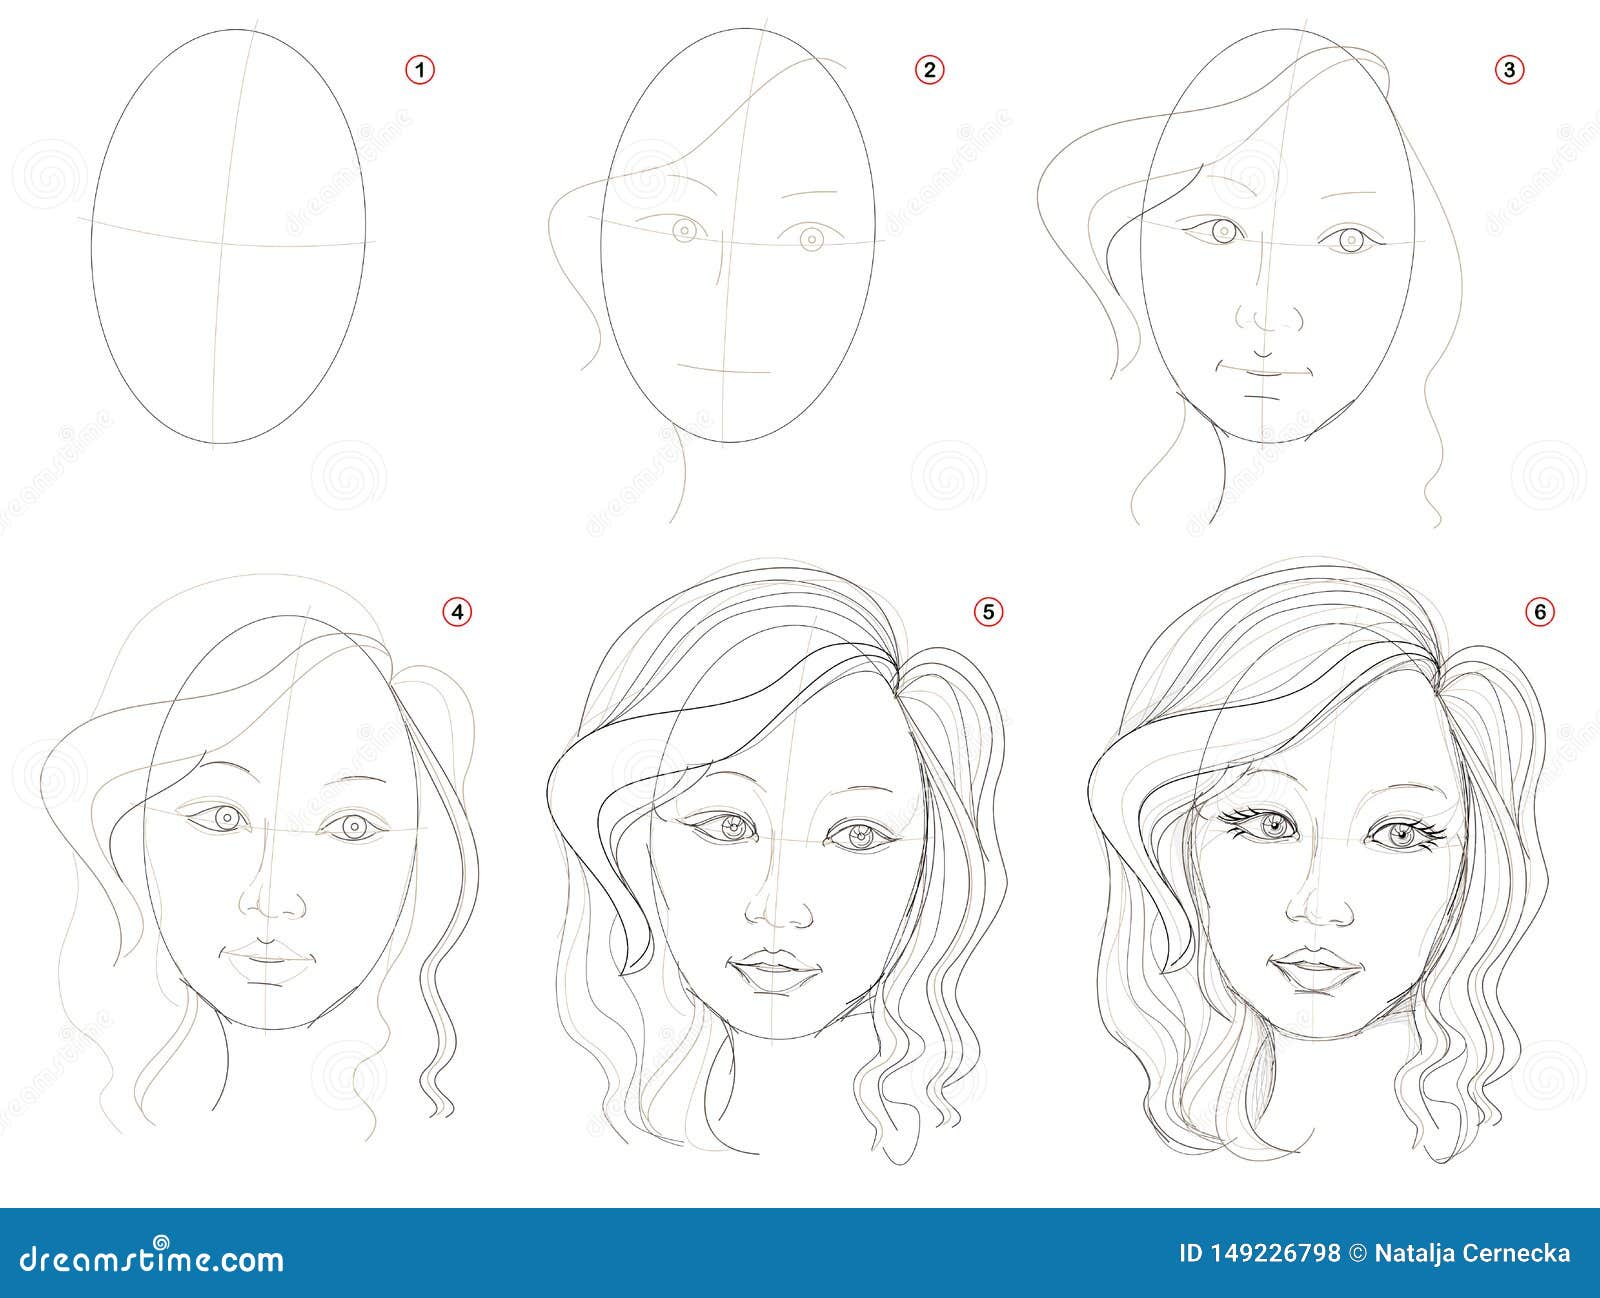 how to create step by step pencil drawing. page shows how to learn step by step draw fantasy girls portrait.